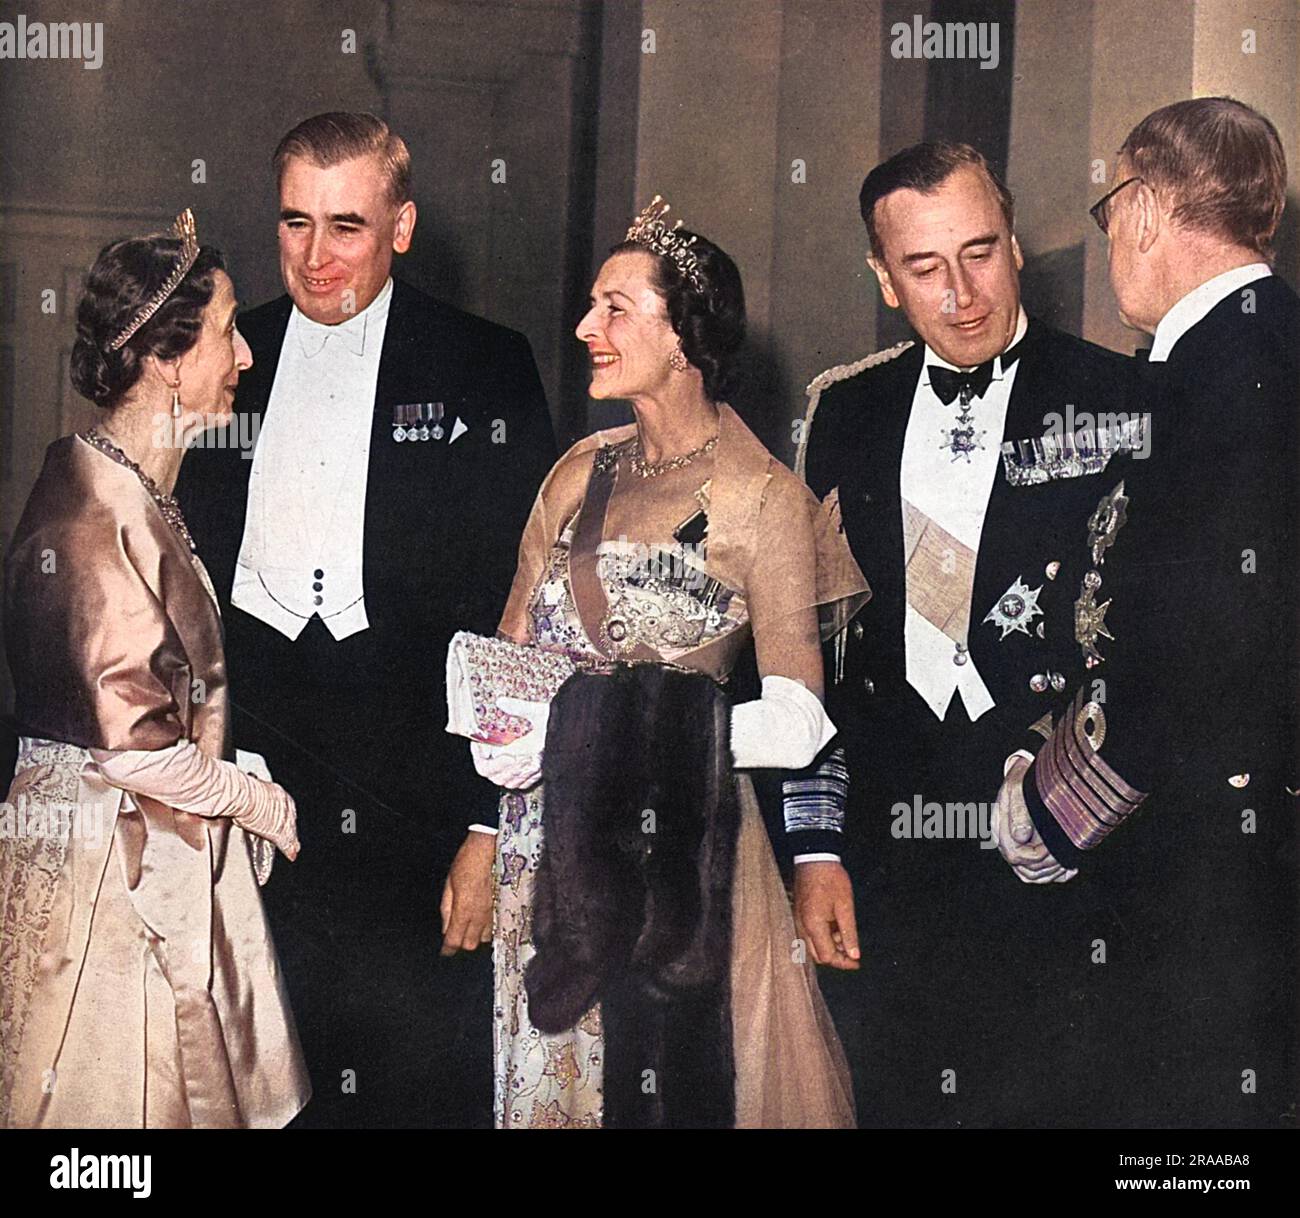 King Gustav VI of Sweden (1882 - 1973), pictured far right of the picture with his second wife, formerly Princess Louise of Battenberg, Lady Louise Mountbatten, being entertained by the Admiralty at a banquet at Greenwich at the Royal Naval College.  They are with Earl and Countess Mountbatten (the Earl was Queen Louise's brother) and the Rt. Hon. J. P. L. Thomas, First Lord of the Admiralty.     Date: 1955 Stock Photo